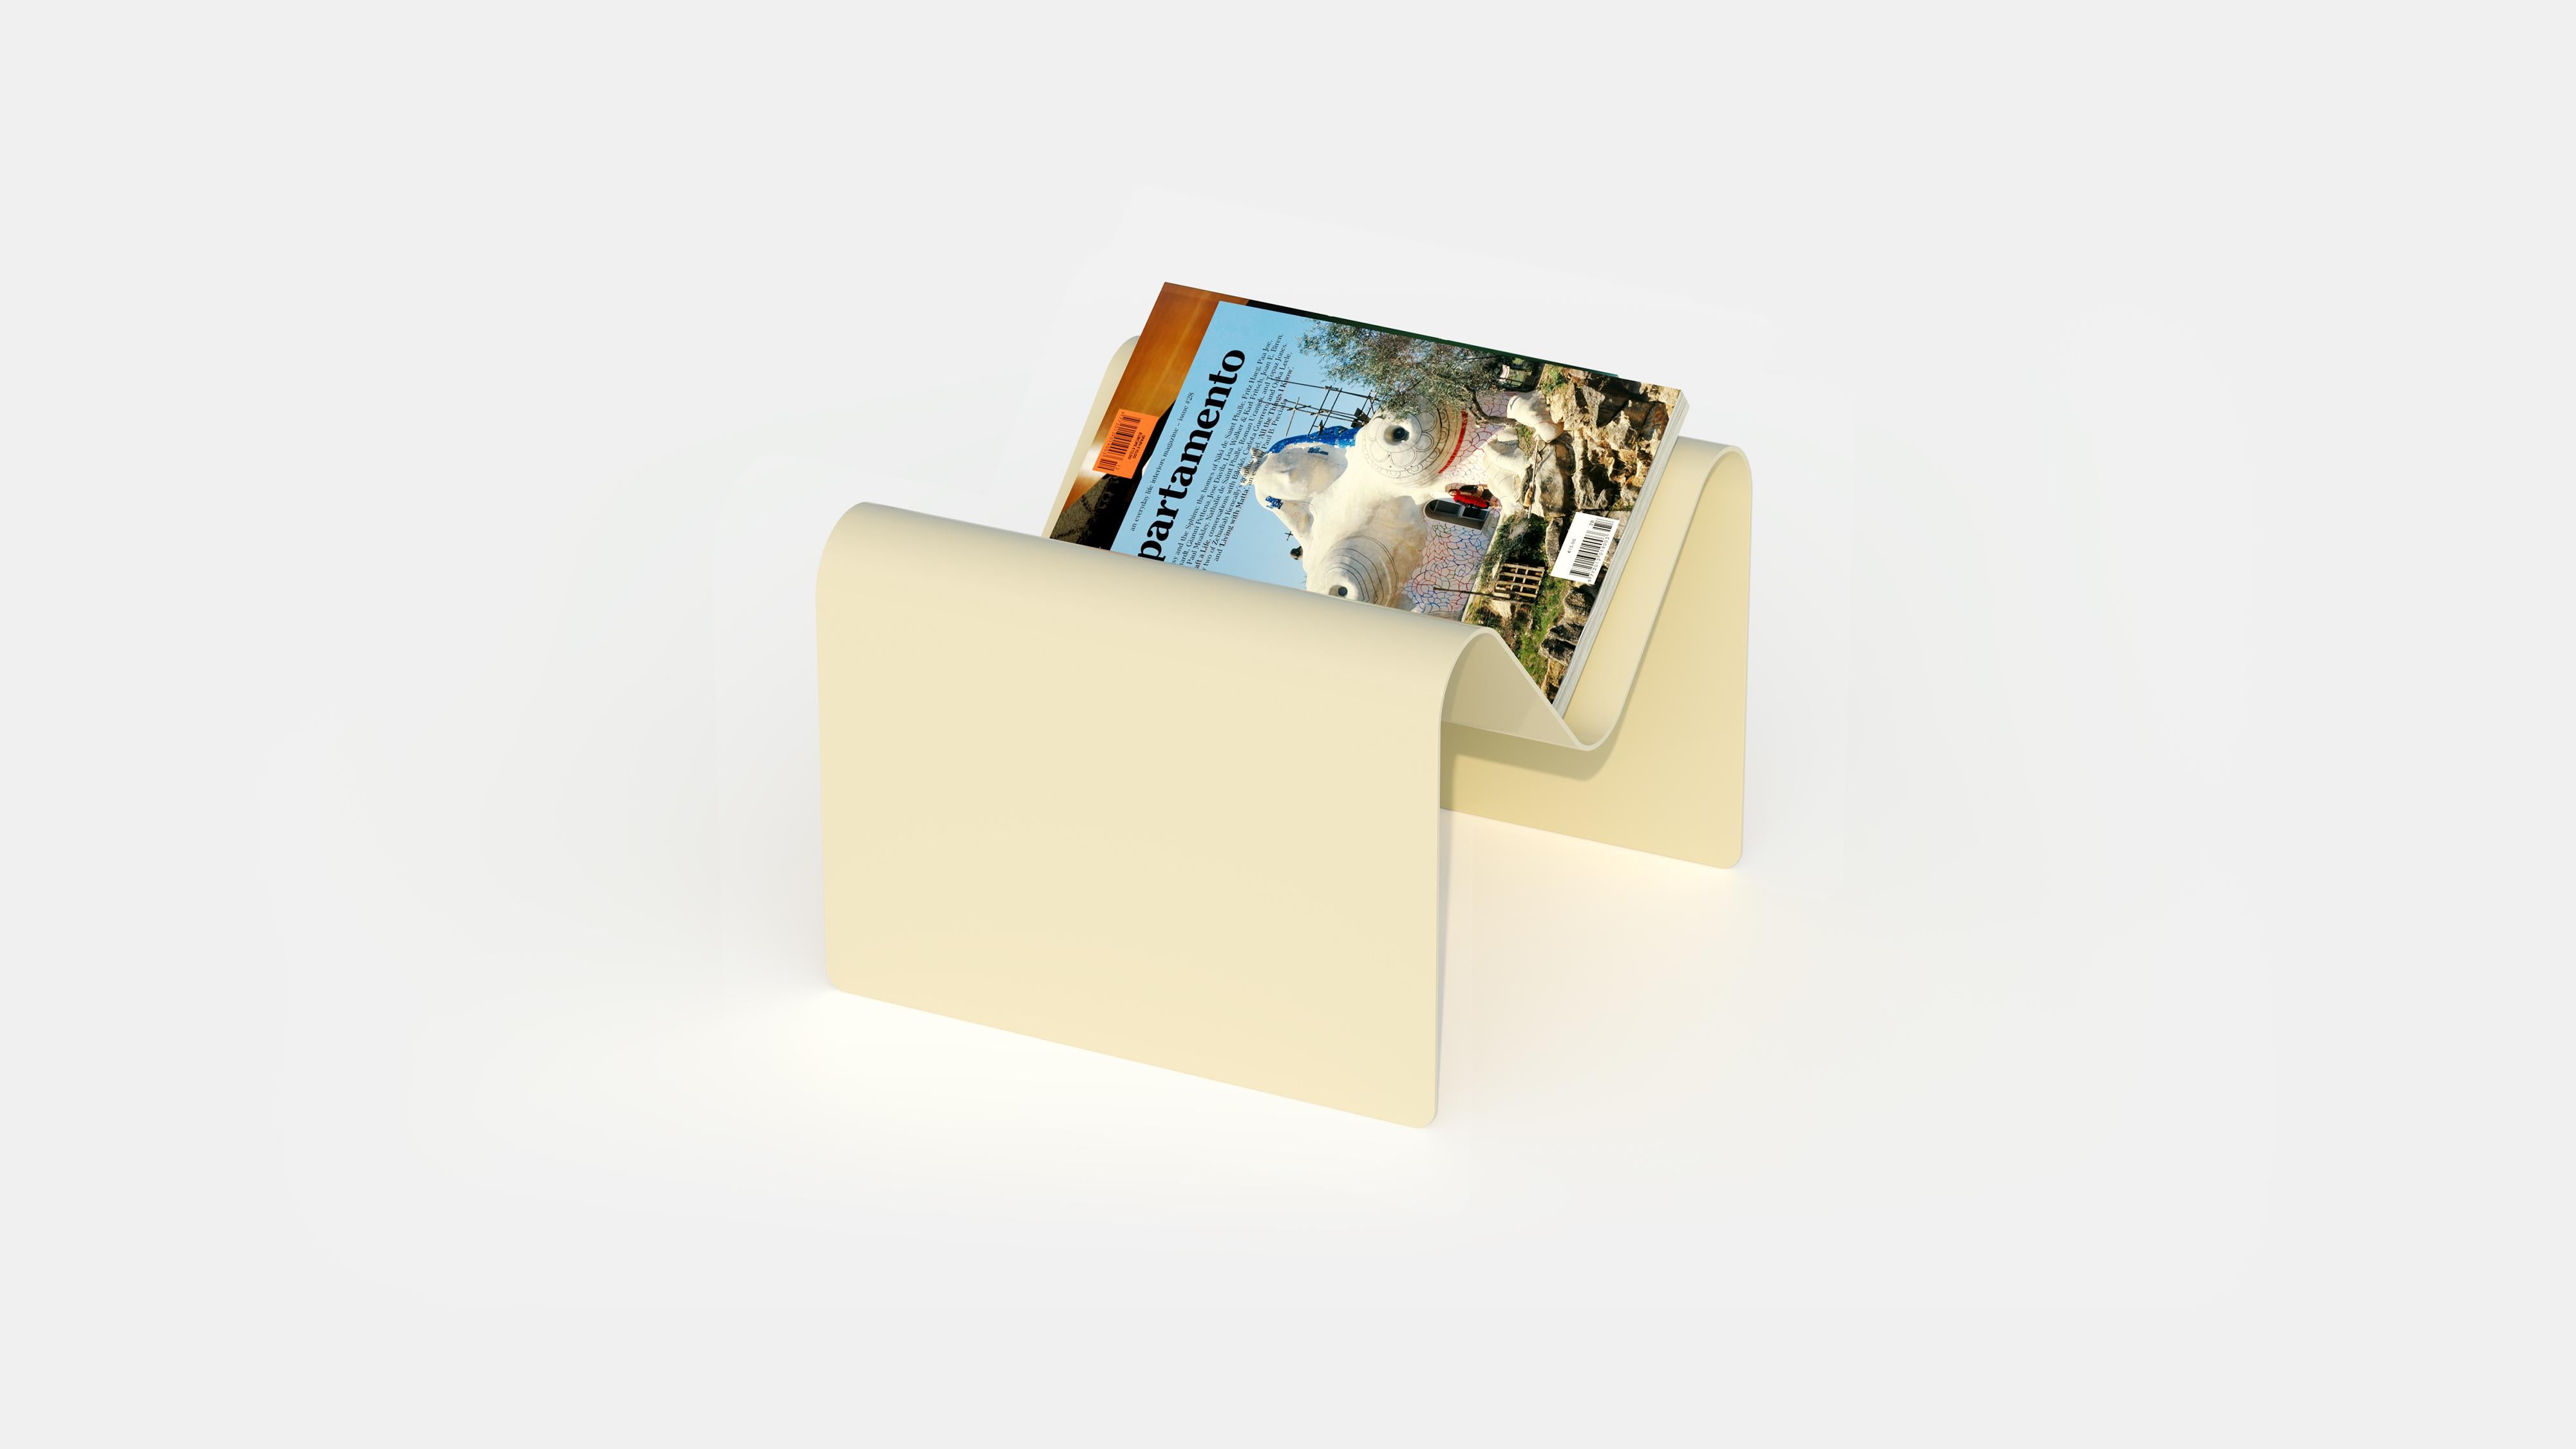 The MOTTO book display has be thought for showcasing your literary treasures. Crafted from a single folded plate of steel, this book display redefines elegance in its simplest form. Powder-coated in an array of captivating colors, MOTTO seamlessly